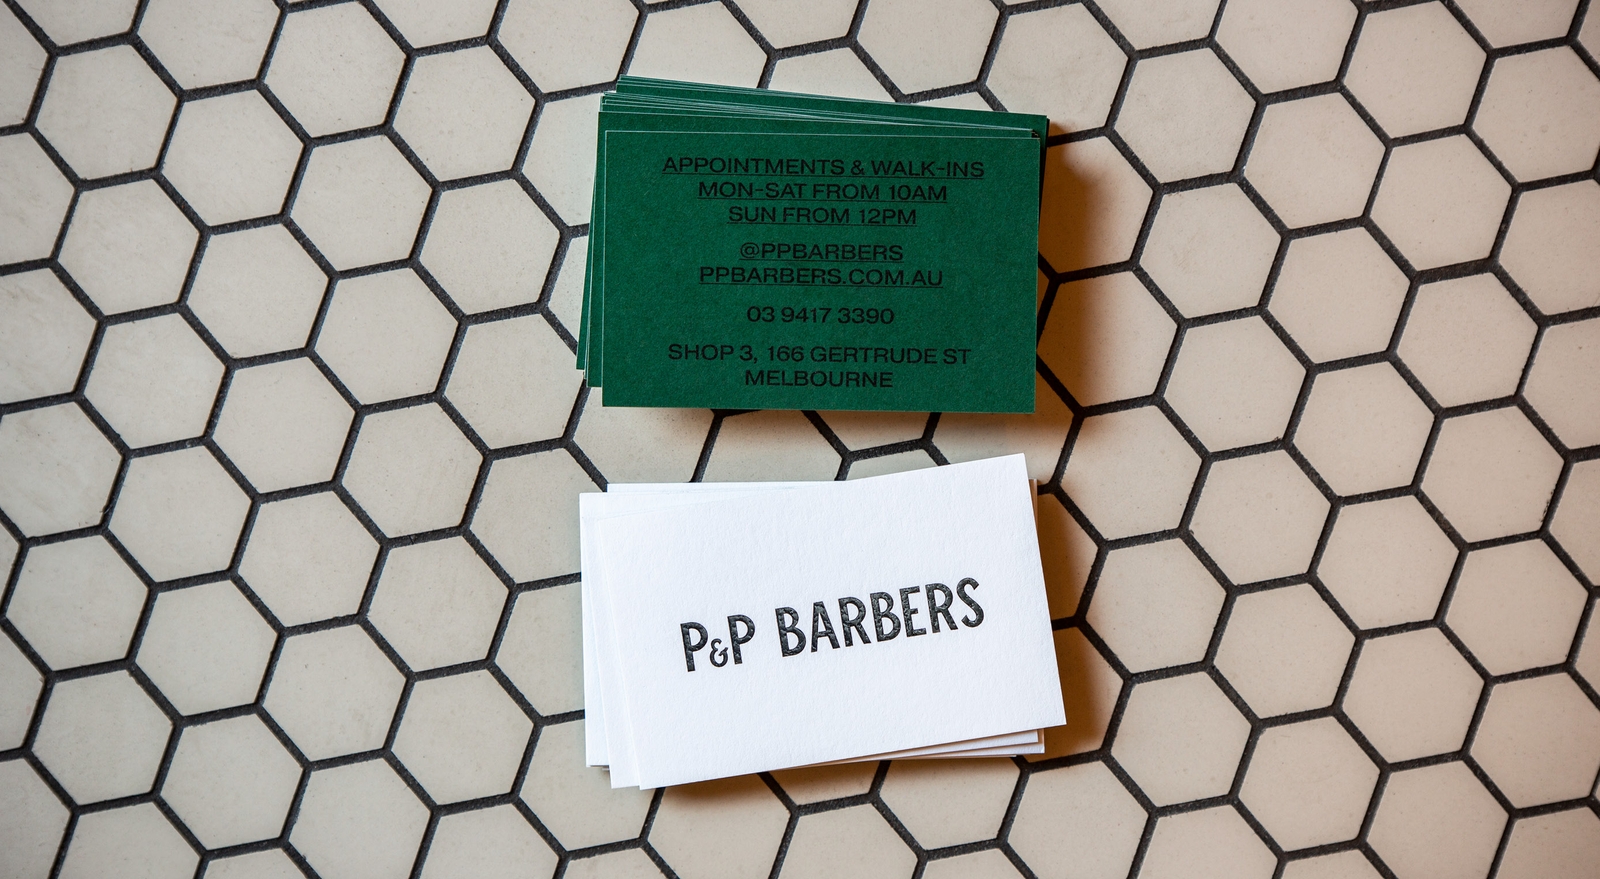 PP Barbers - Brand and Website - Business Card | Atollon - a design company